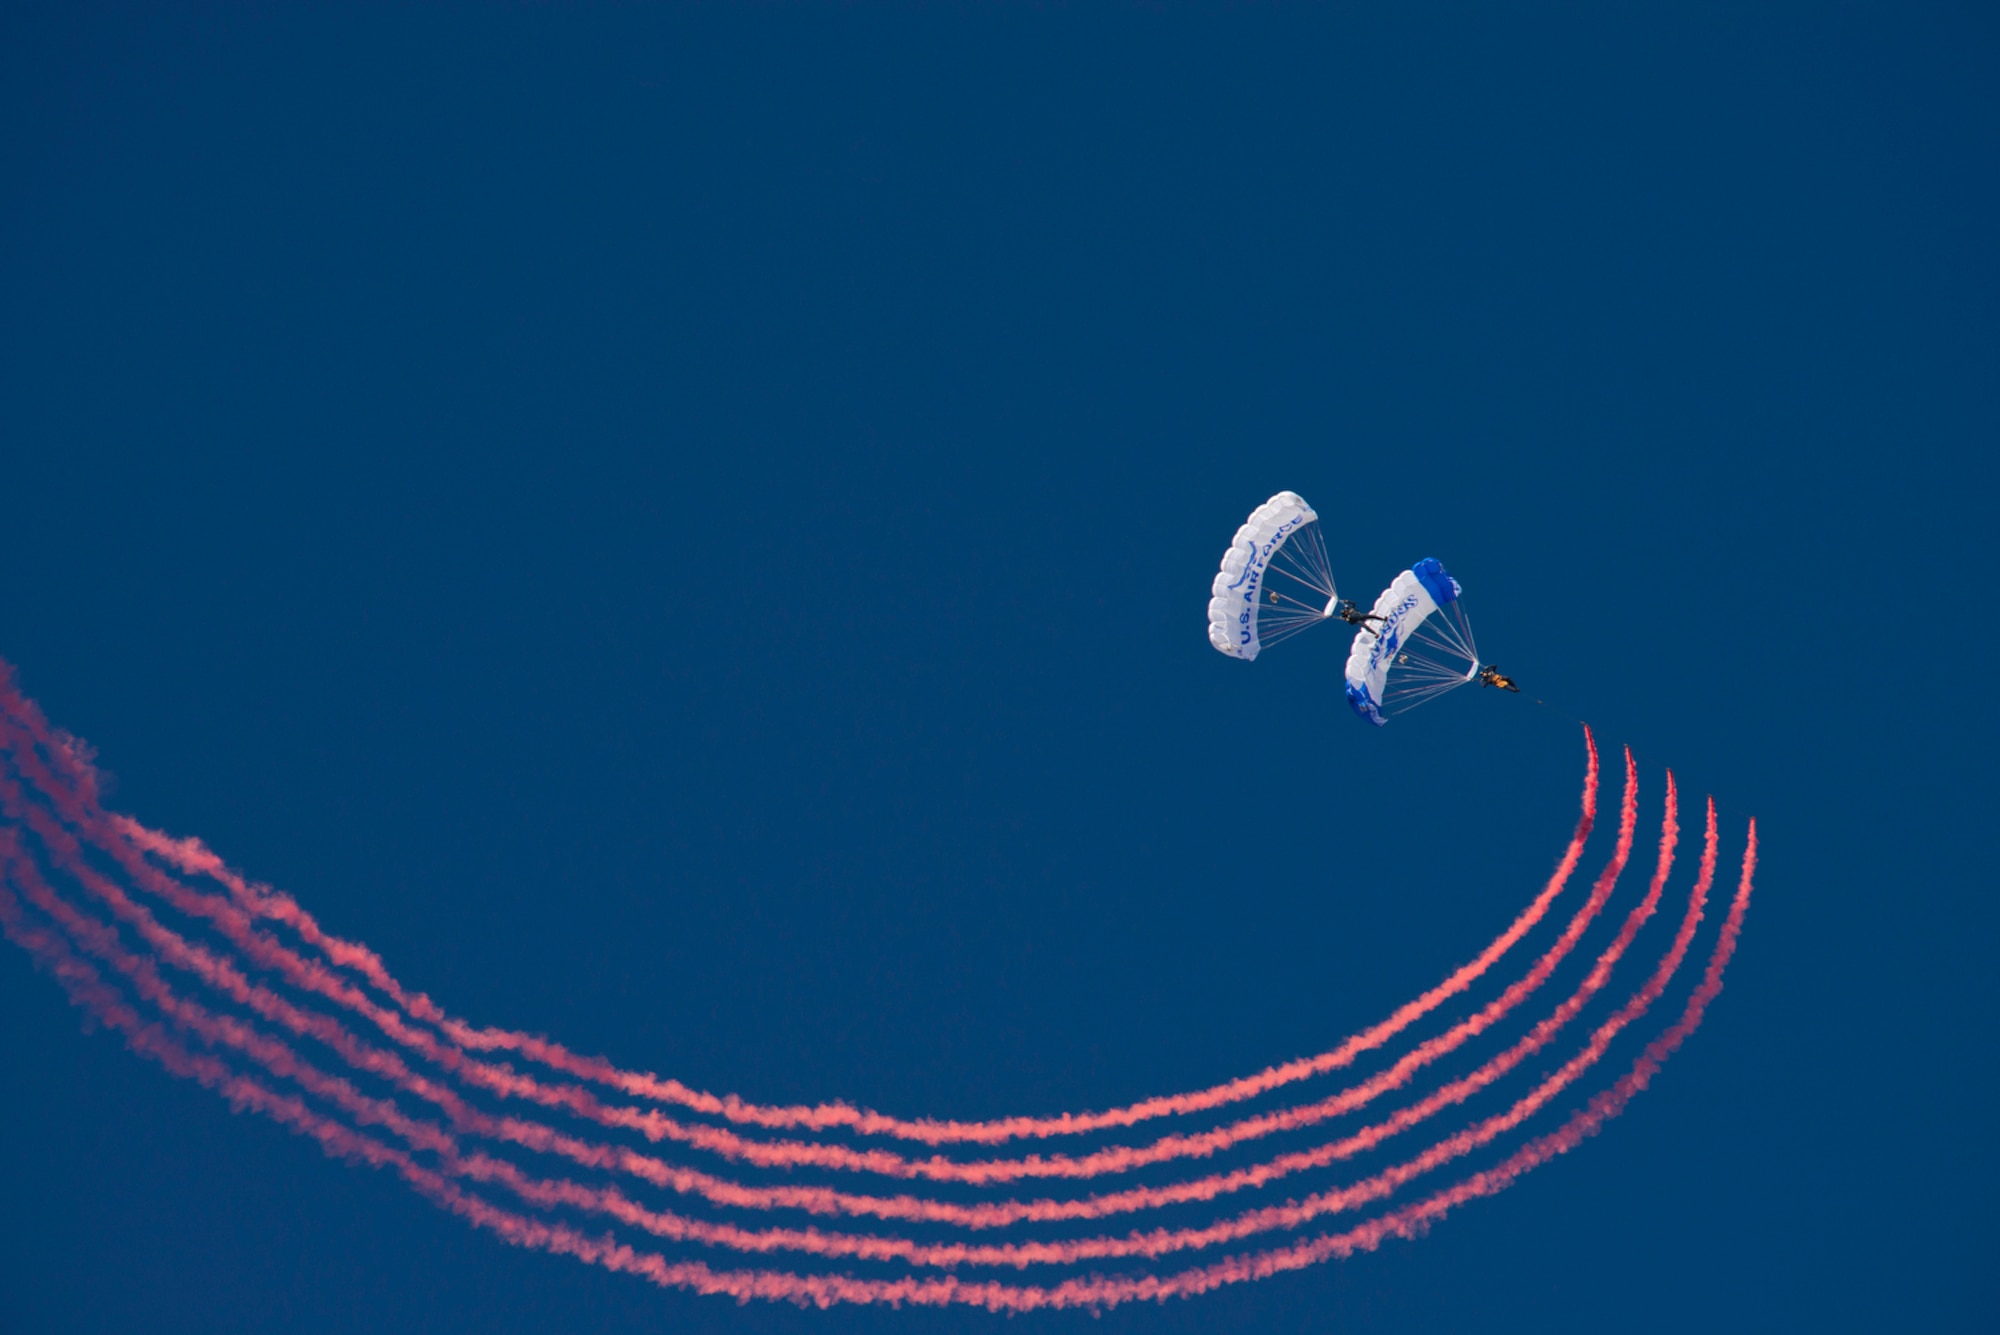 Members of the Wings of Blue Demonstration Team practice a double-stacked-smoke-chain jump above the U.S. Air Force Academy in Colorado Springs, Co. The Wings of Blue demonstration team performs at every home Air Force football game, various air shows throughout the nation, and other high profile venues. (U.S. Air Force photo/Tech. Sgt. Bennie J. Davis III)